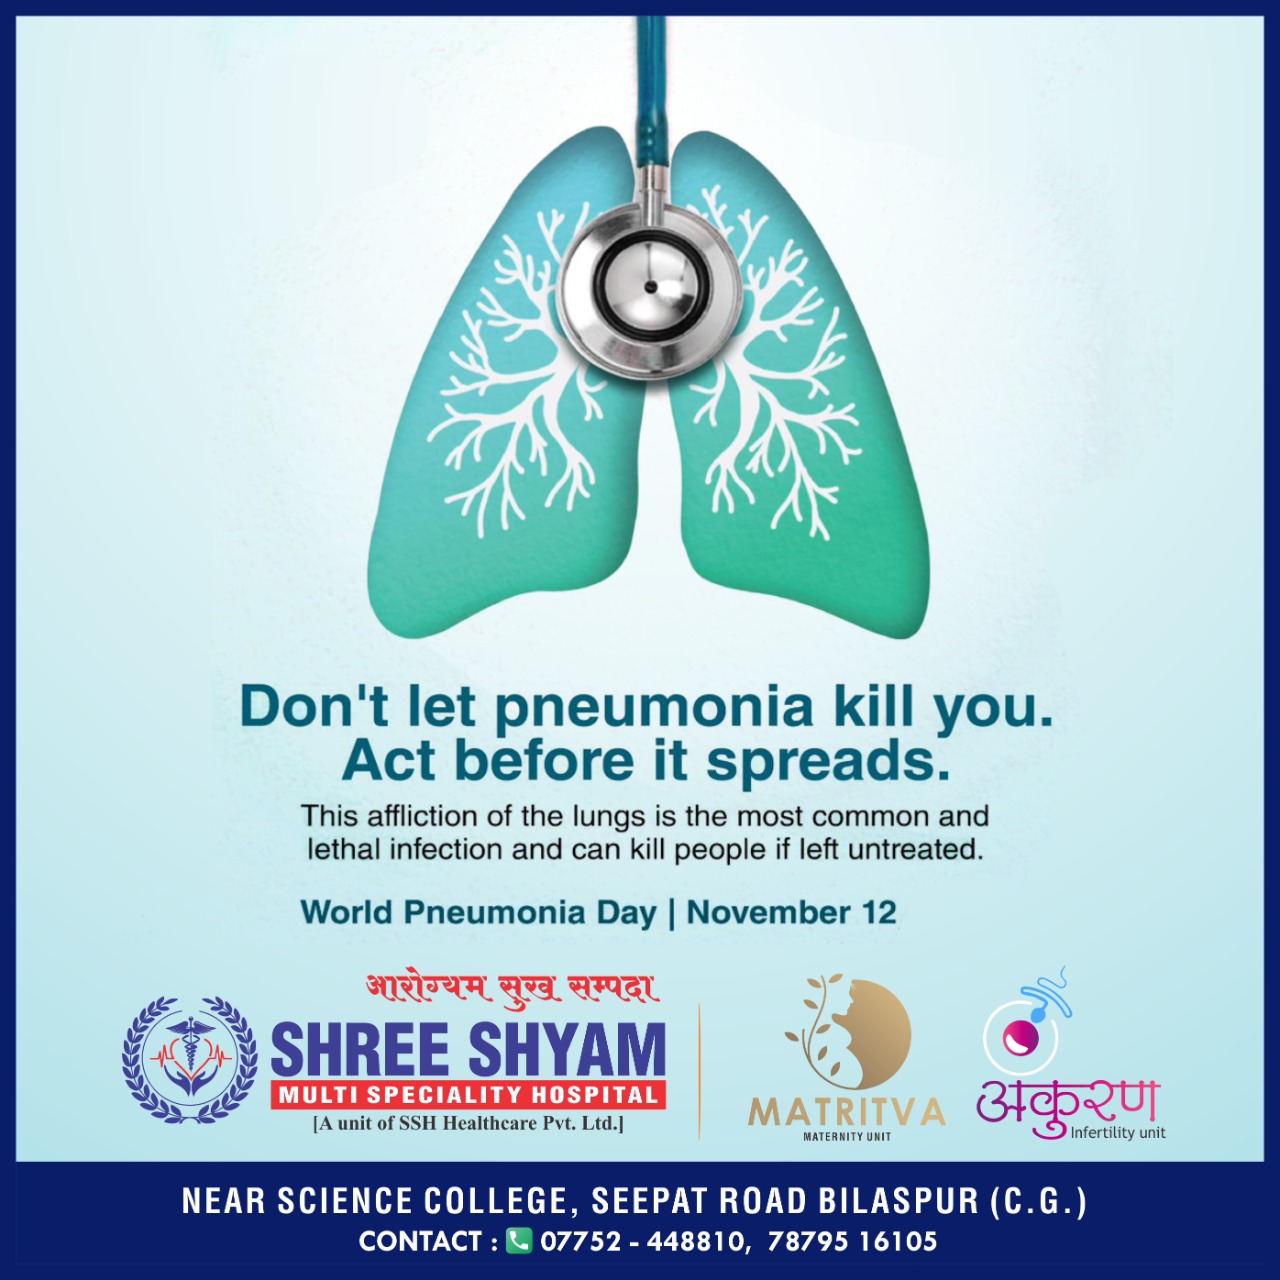 Don't let pneumonia kill you. Act before its it spreads.